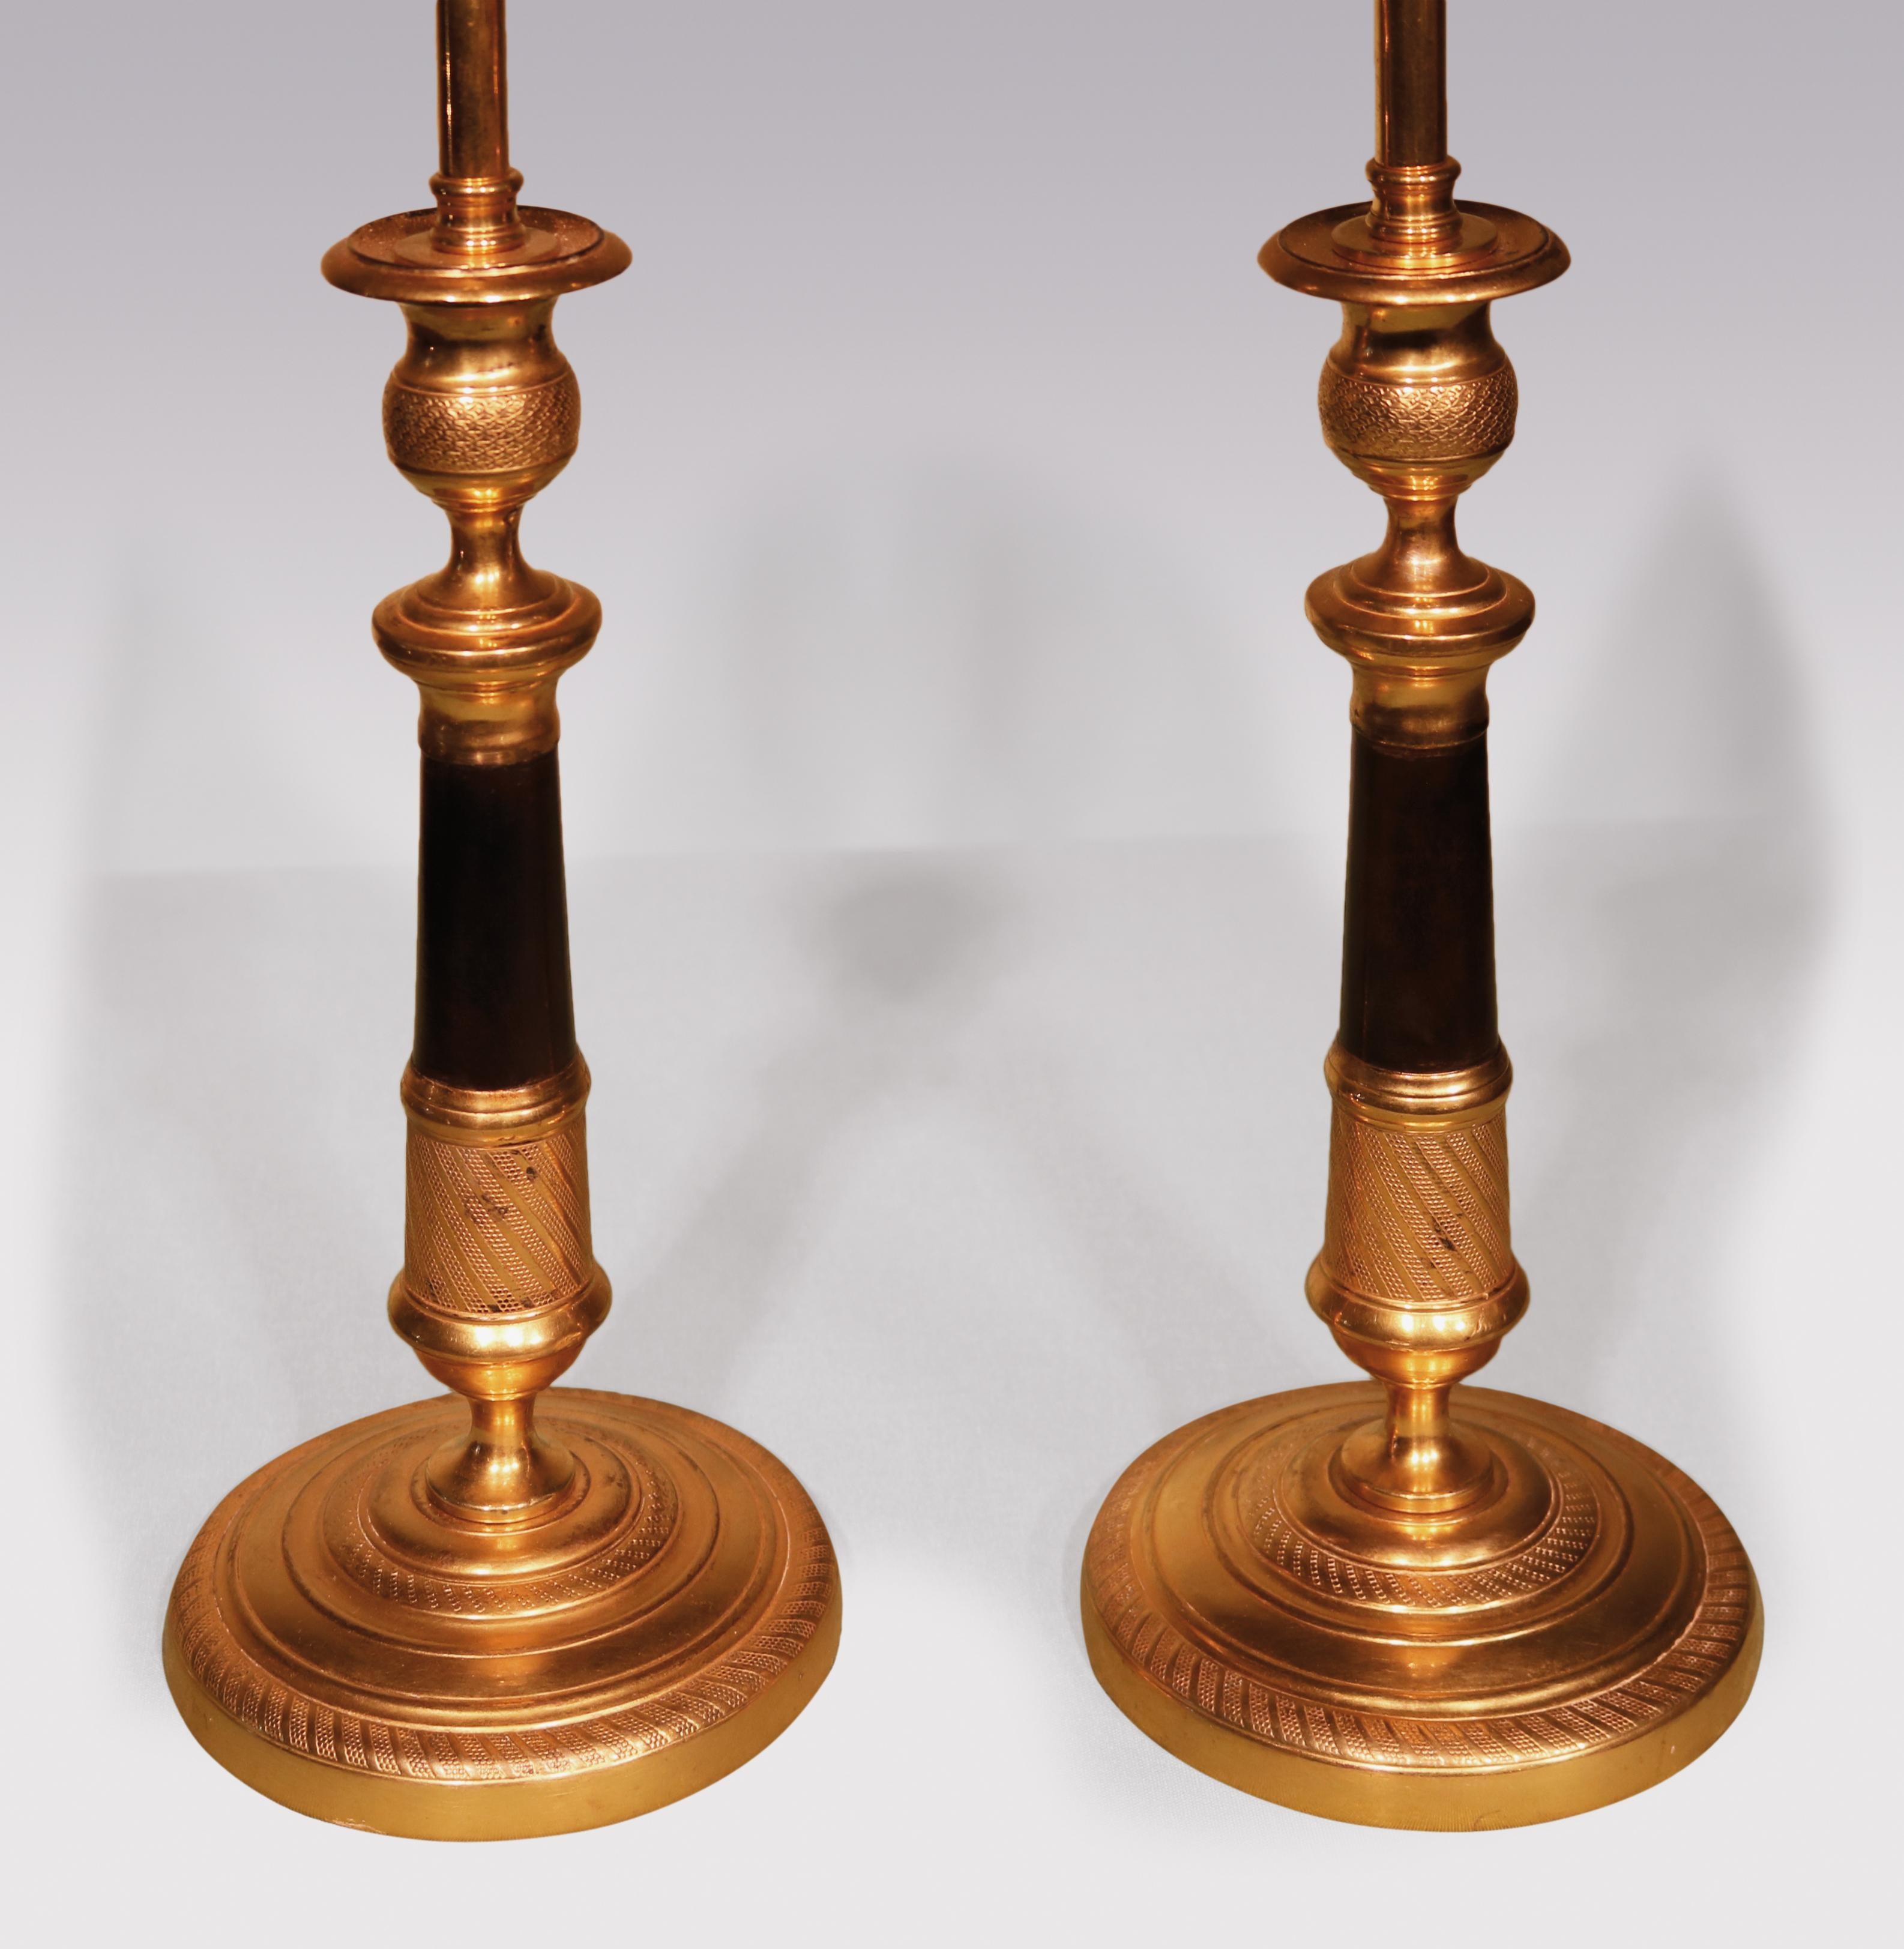 A pair of early 19th century bronze & ormolu Candlesticks, having fishscale engine-turned sconces above tapering stems with spiral engine-turning supported on circular bases.

(Now converted to lamps).